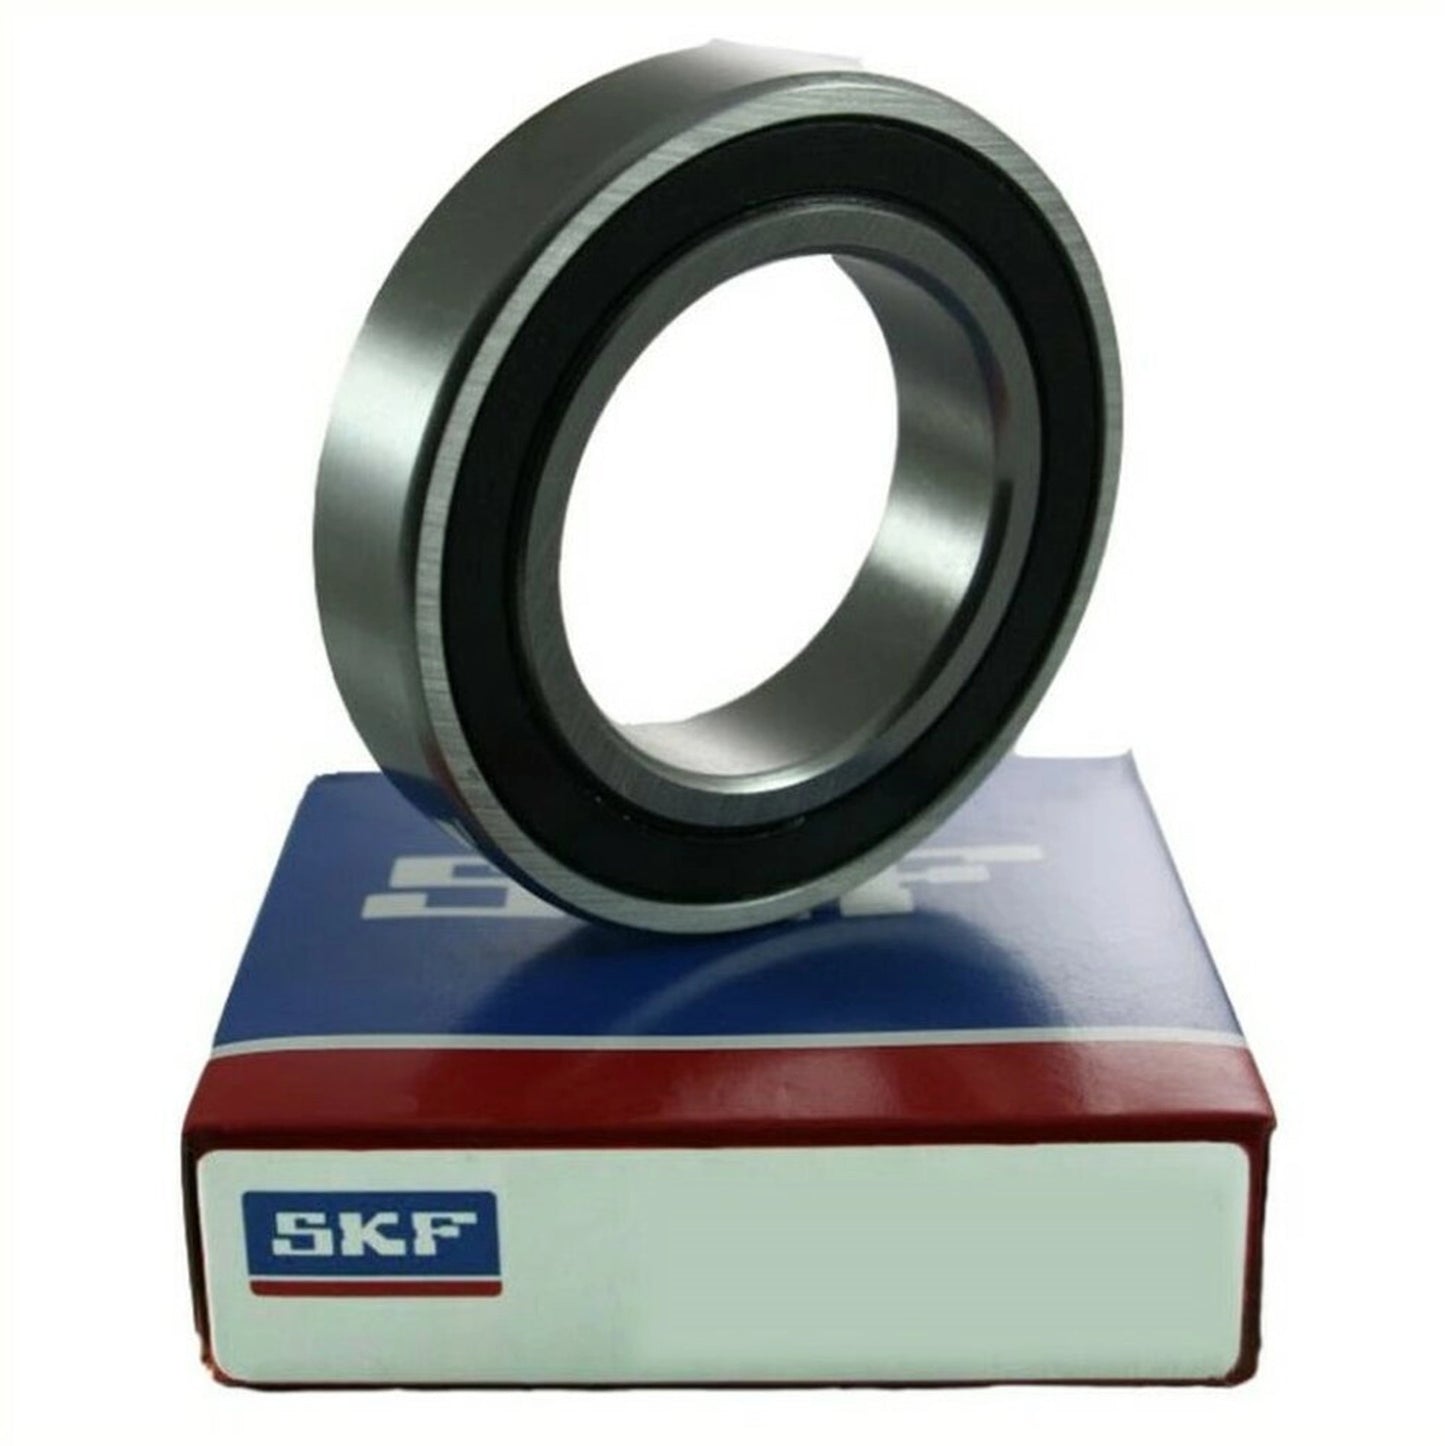 Roulement 6309-2RS1 / C3 45x100x25 SKF